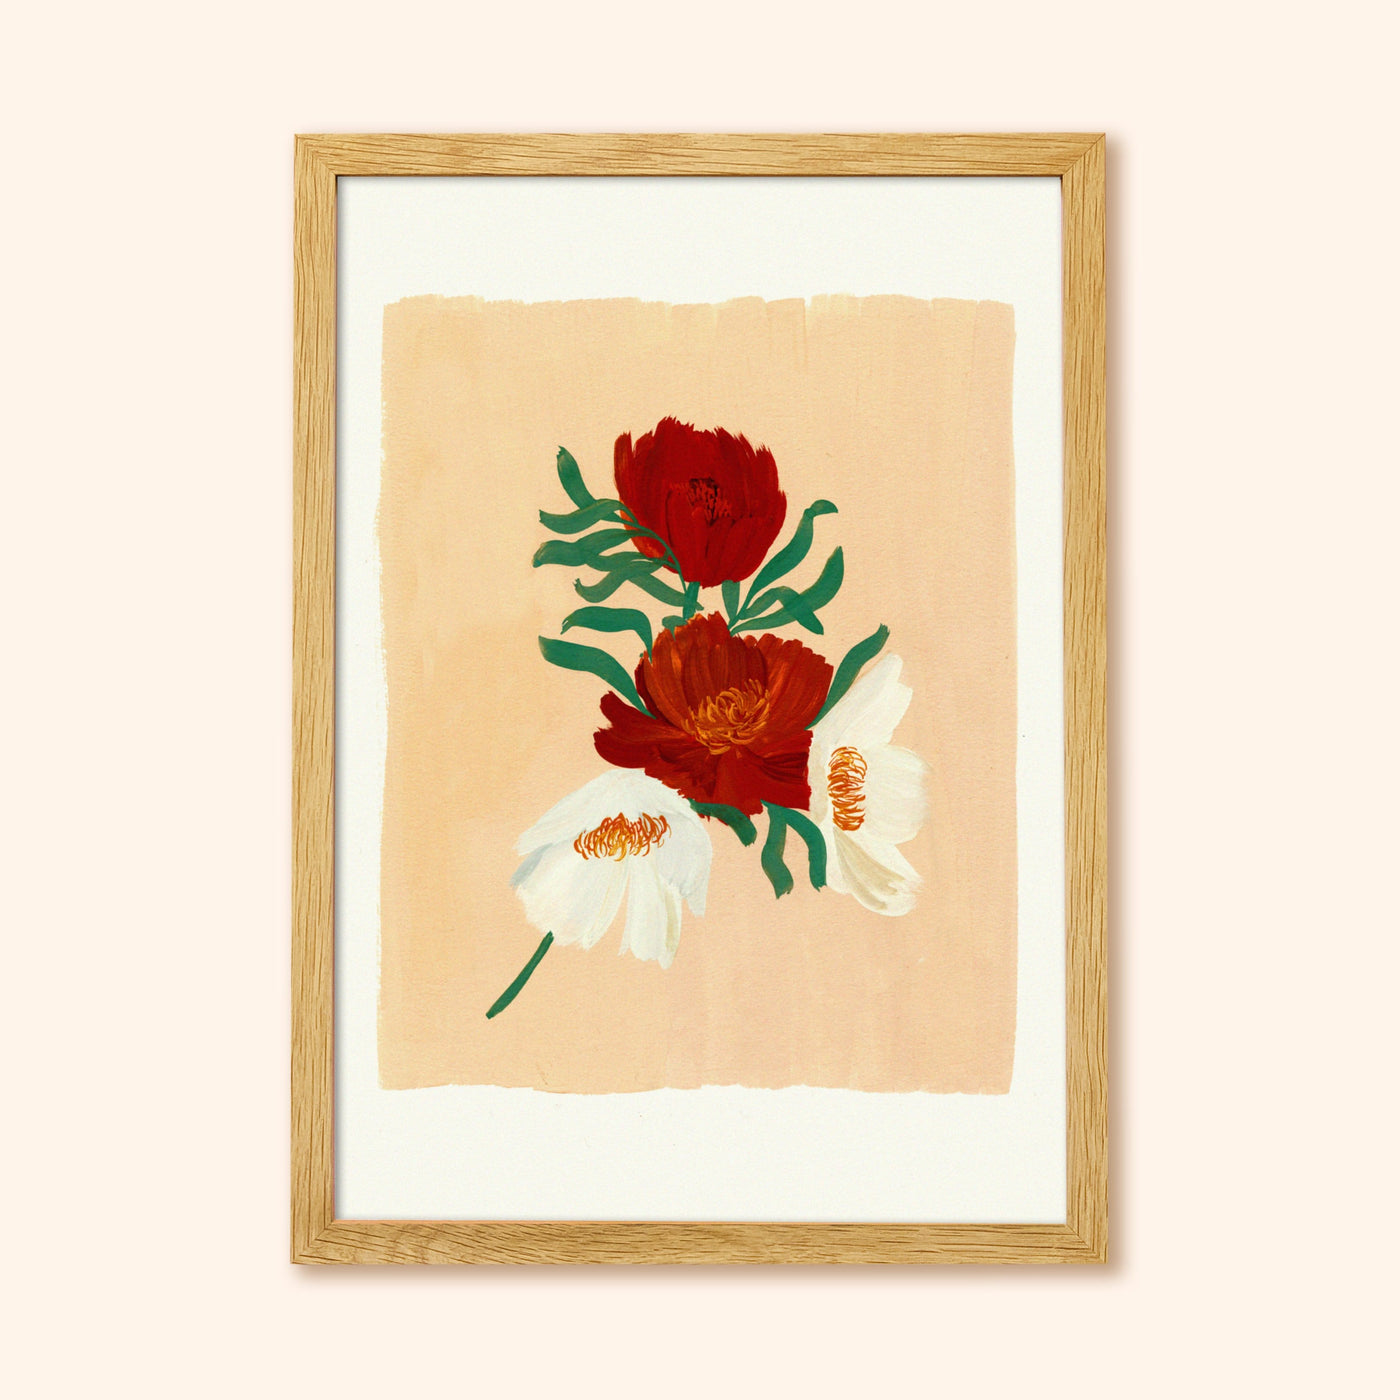 A3 Floral Print With Red and White Cosmos Flowers In An Oak Frame -  Annie Dornan-Smith